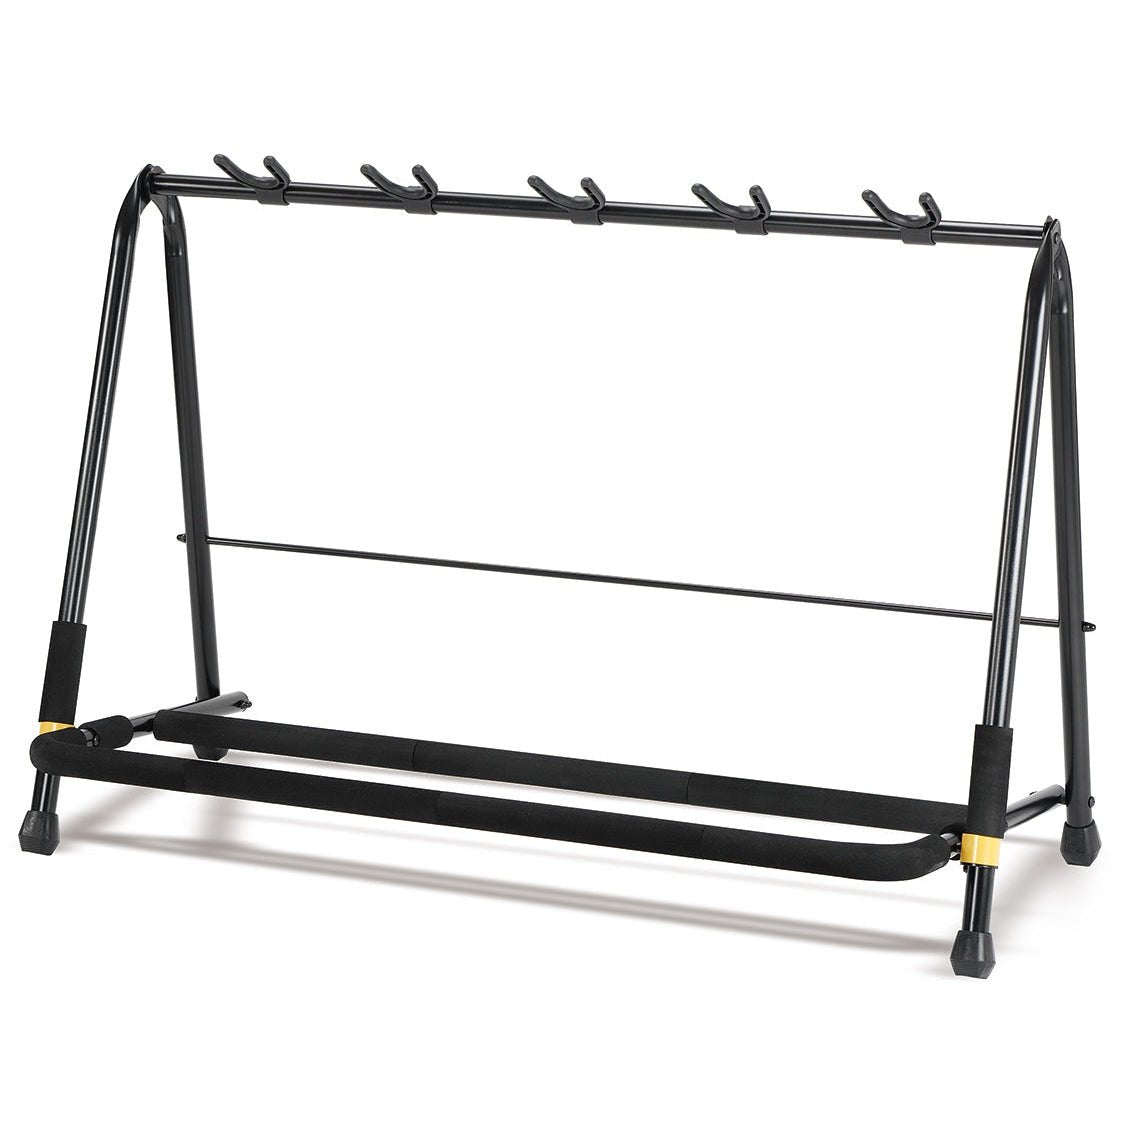 Hercules Stands GS525B Multi-guitar Rack for up to 5 Guitars - Leitz Music-635464420738-GS525B